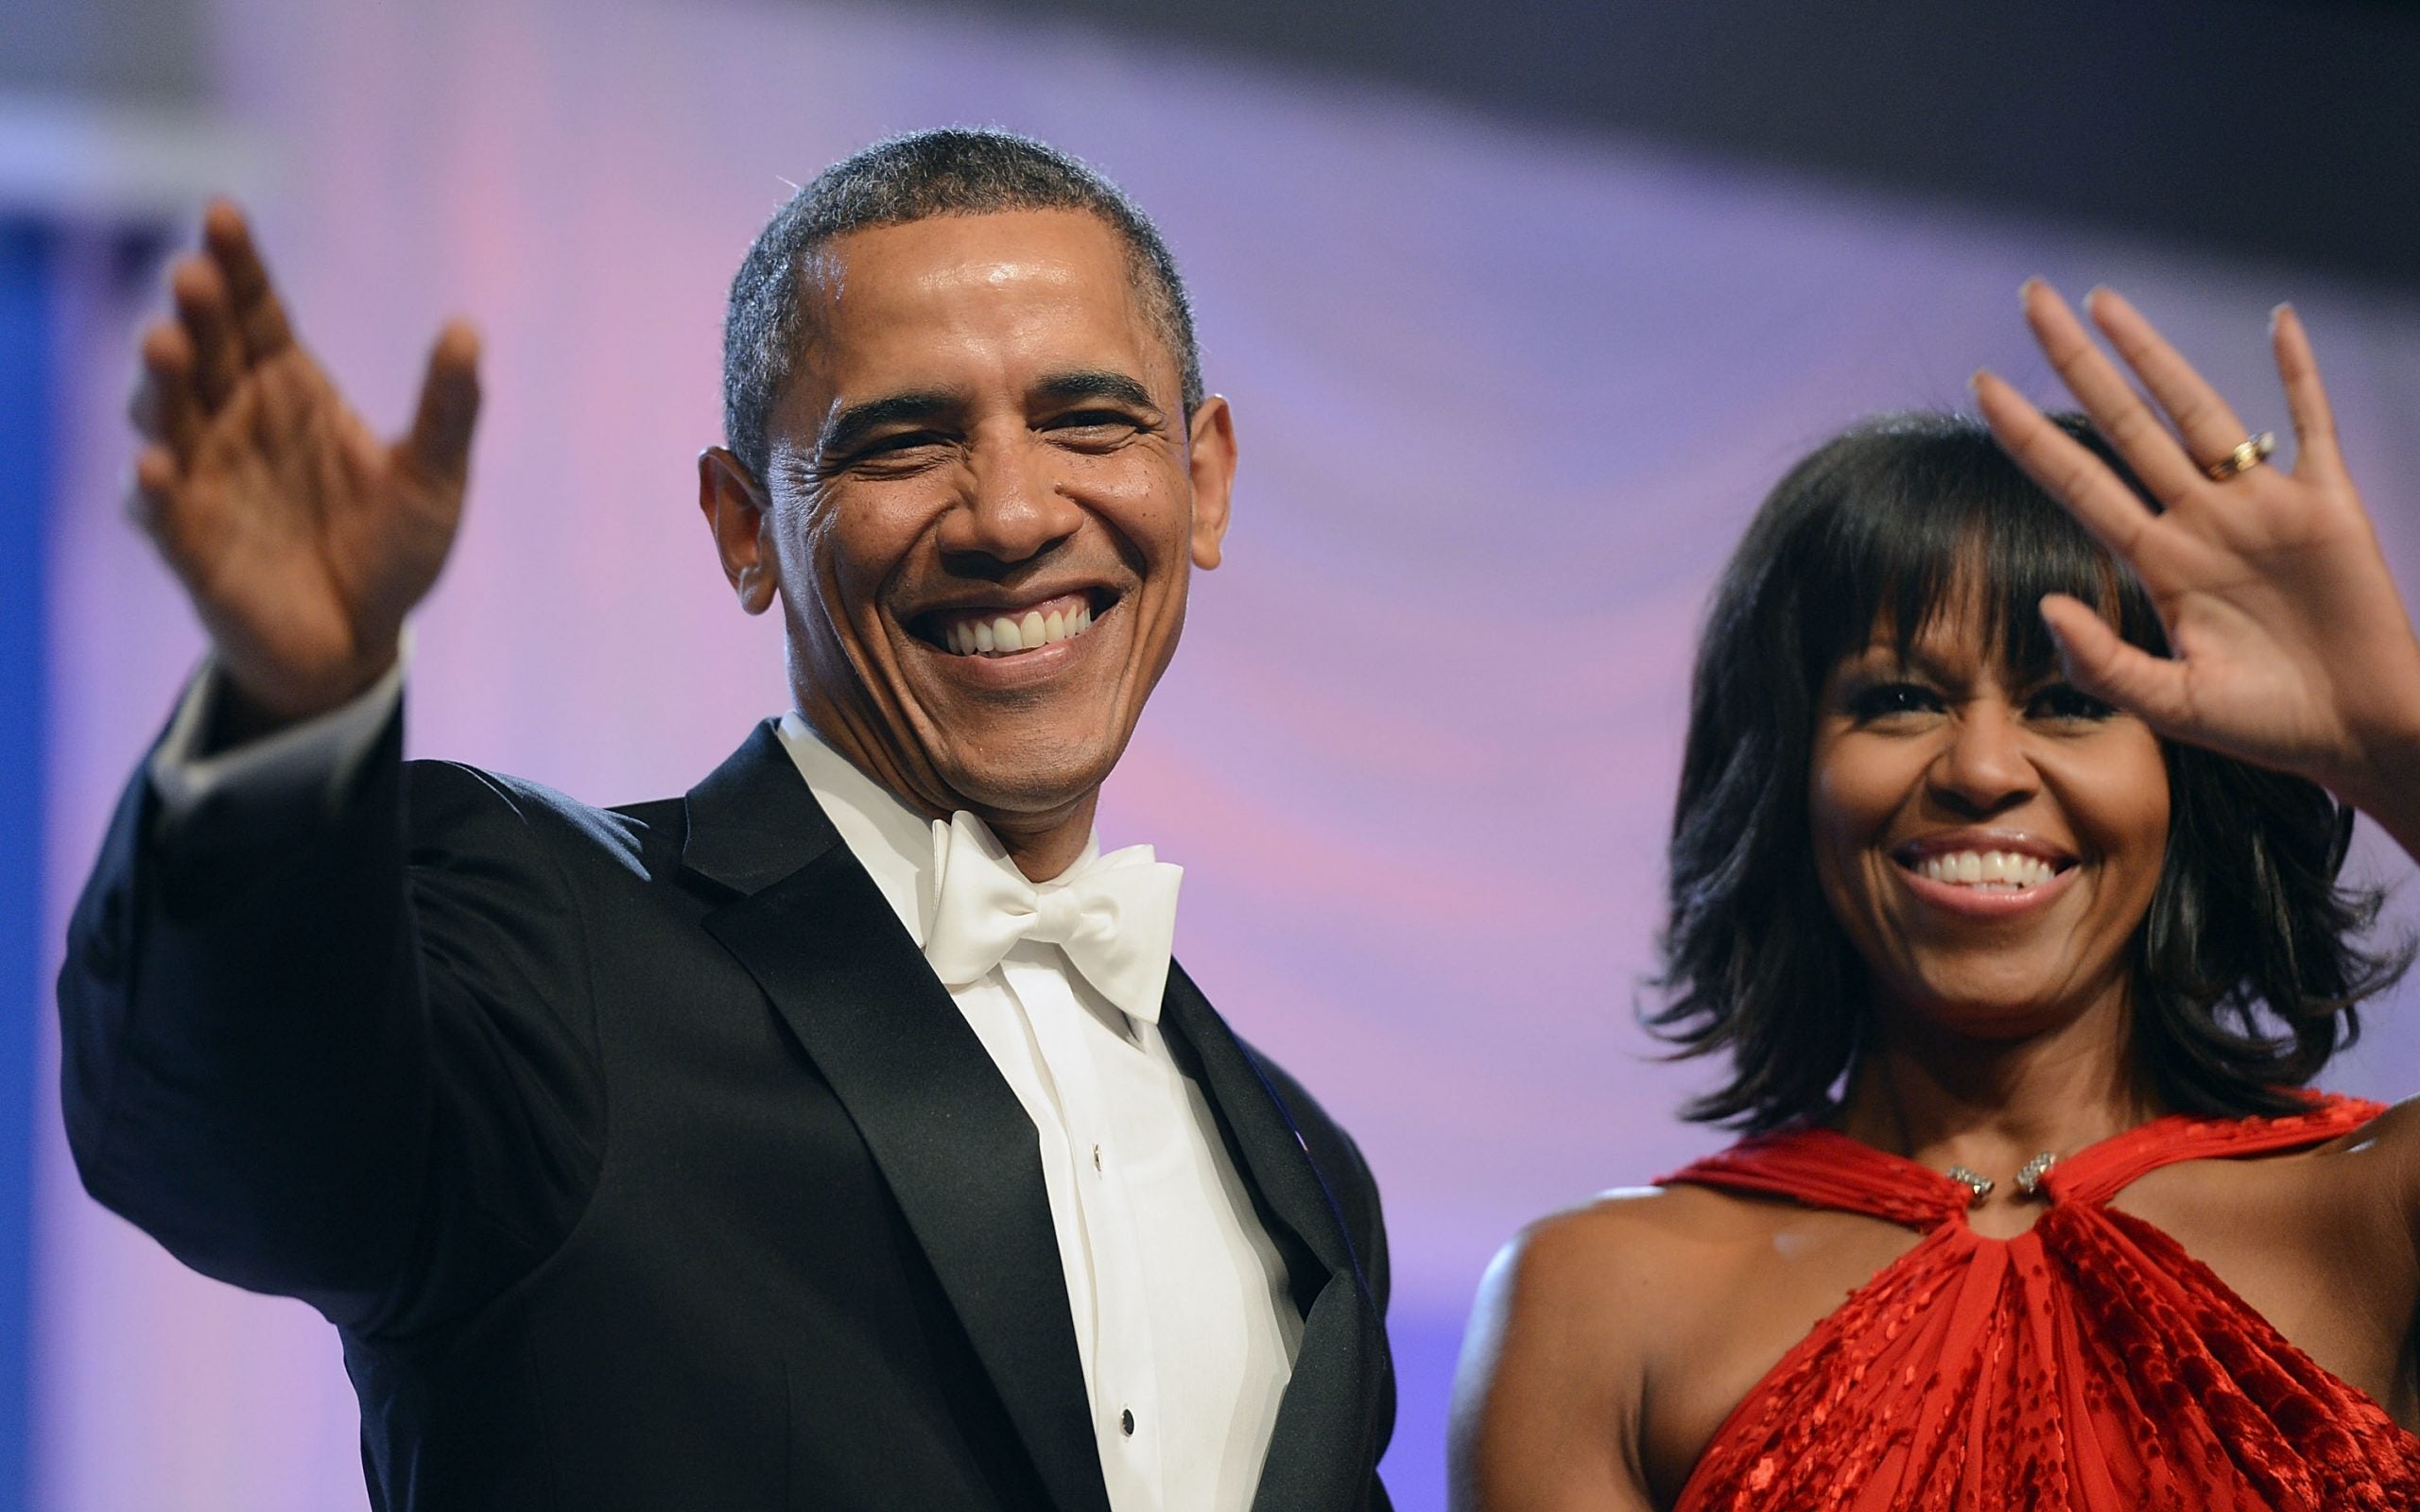 Barack Obama's New Book Reveals How Presidency Affected His Marriage